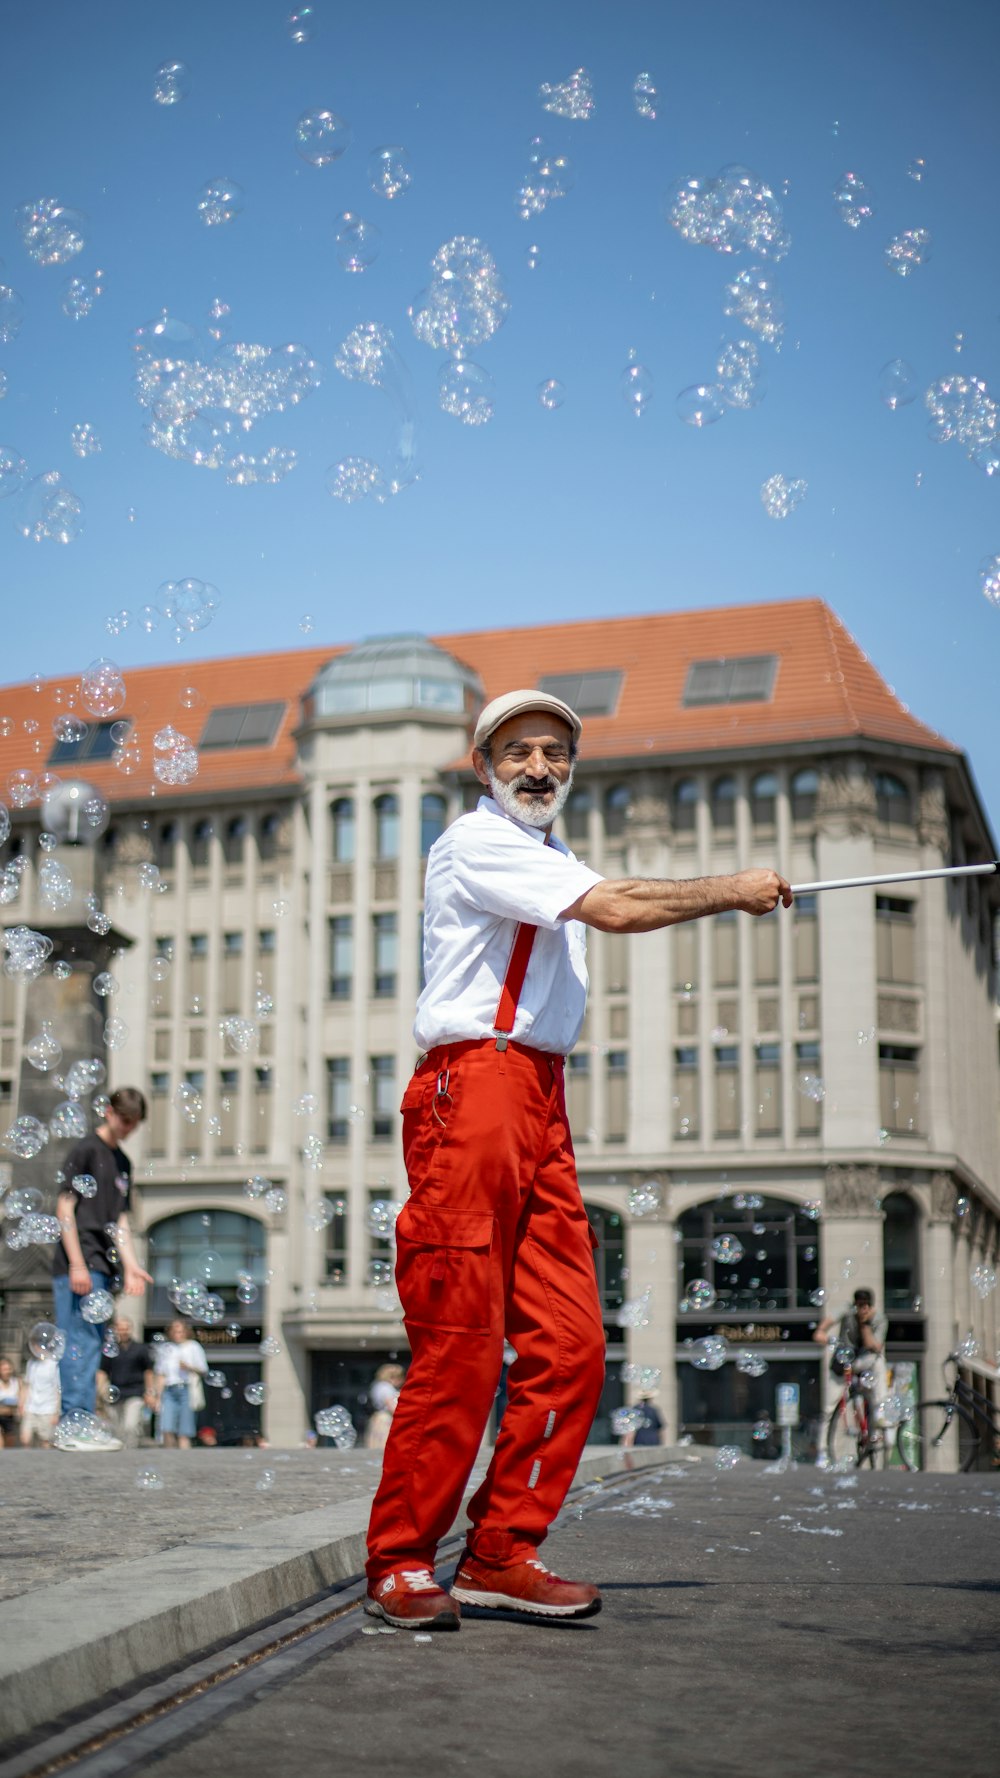 a man in red pants and a white shirt is playing with bubbles